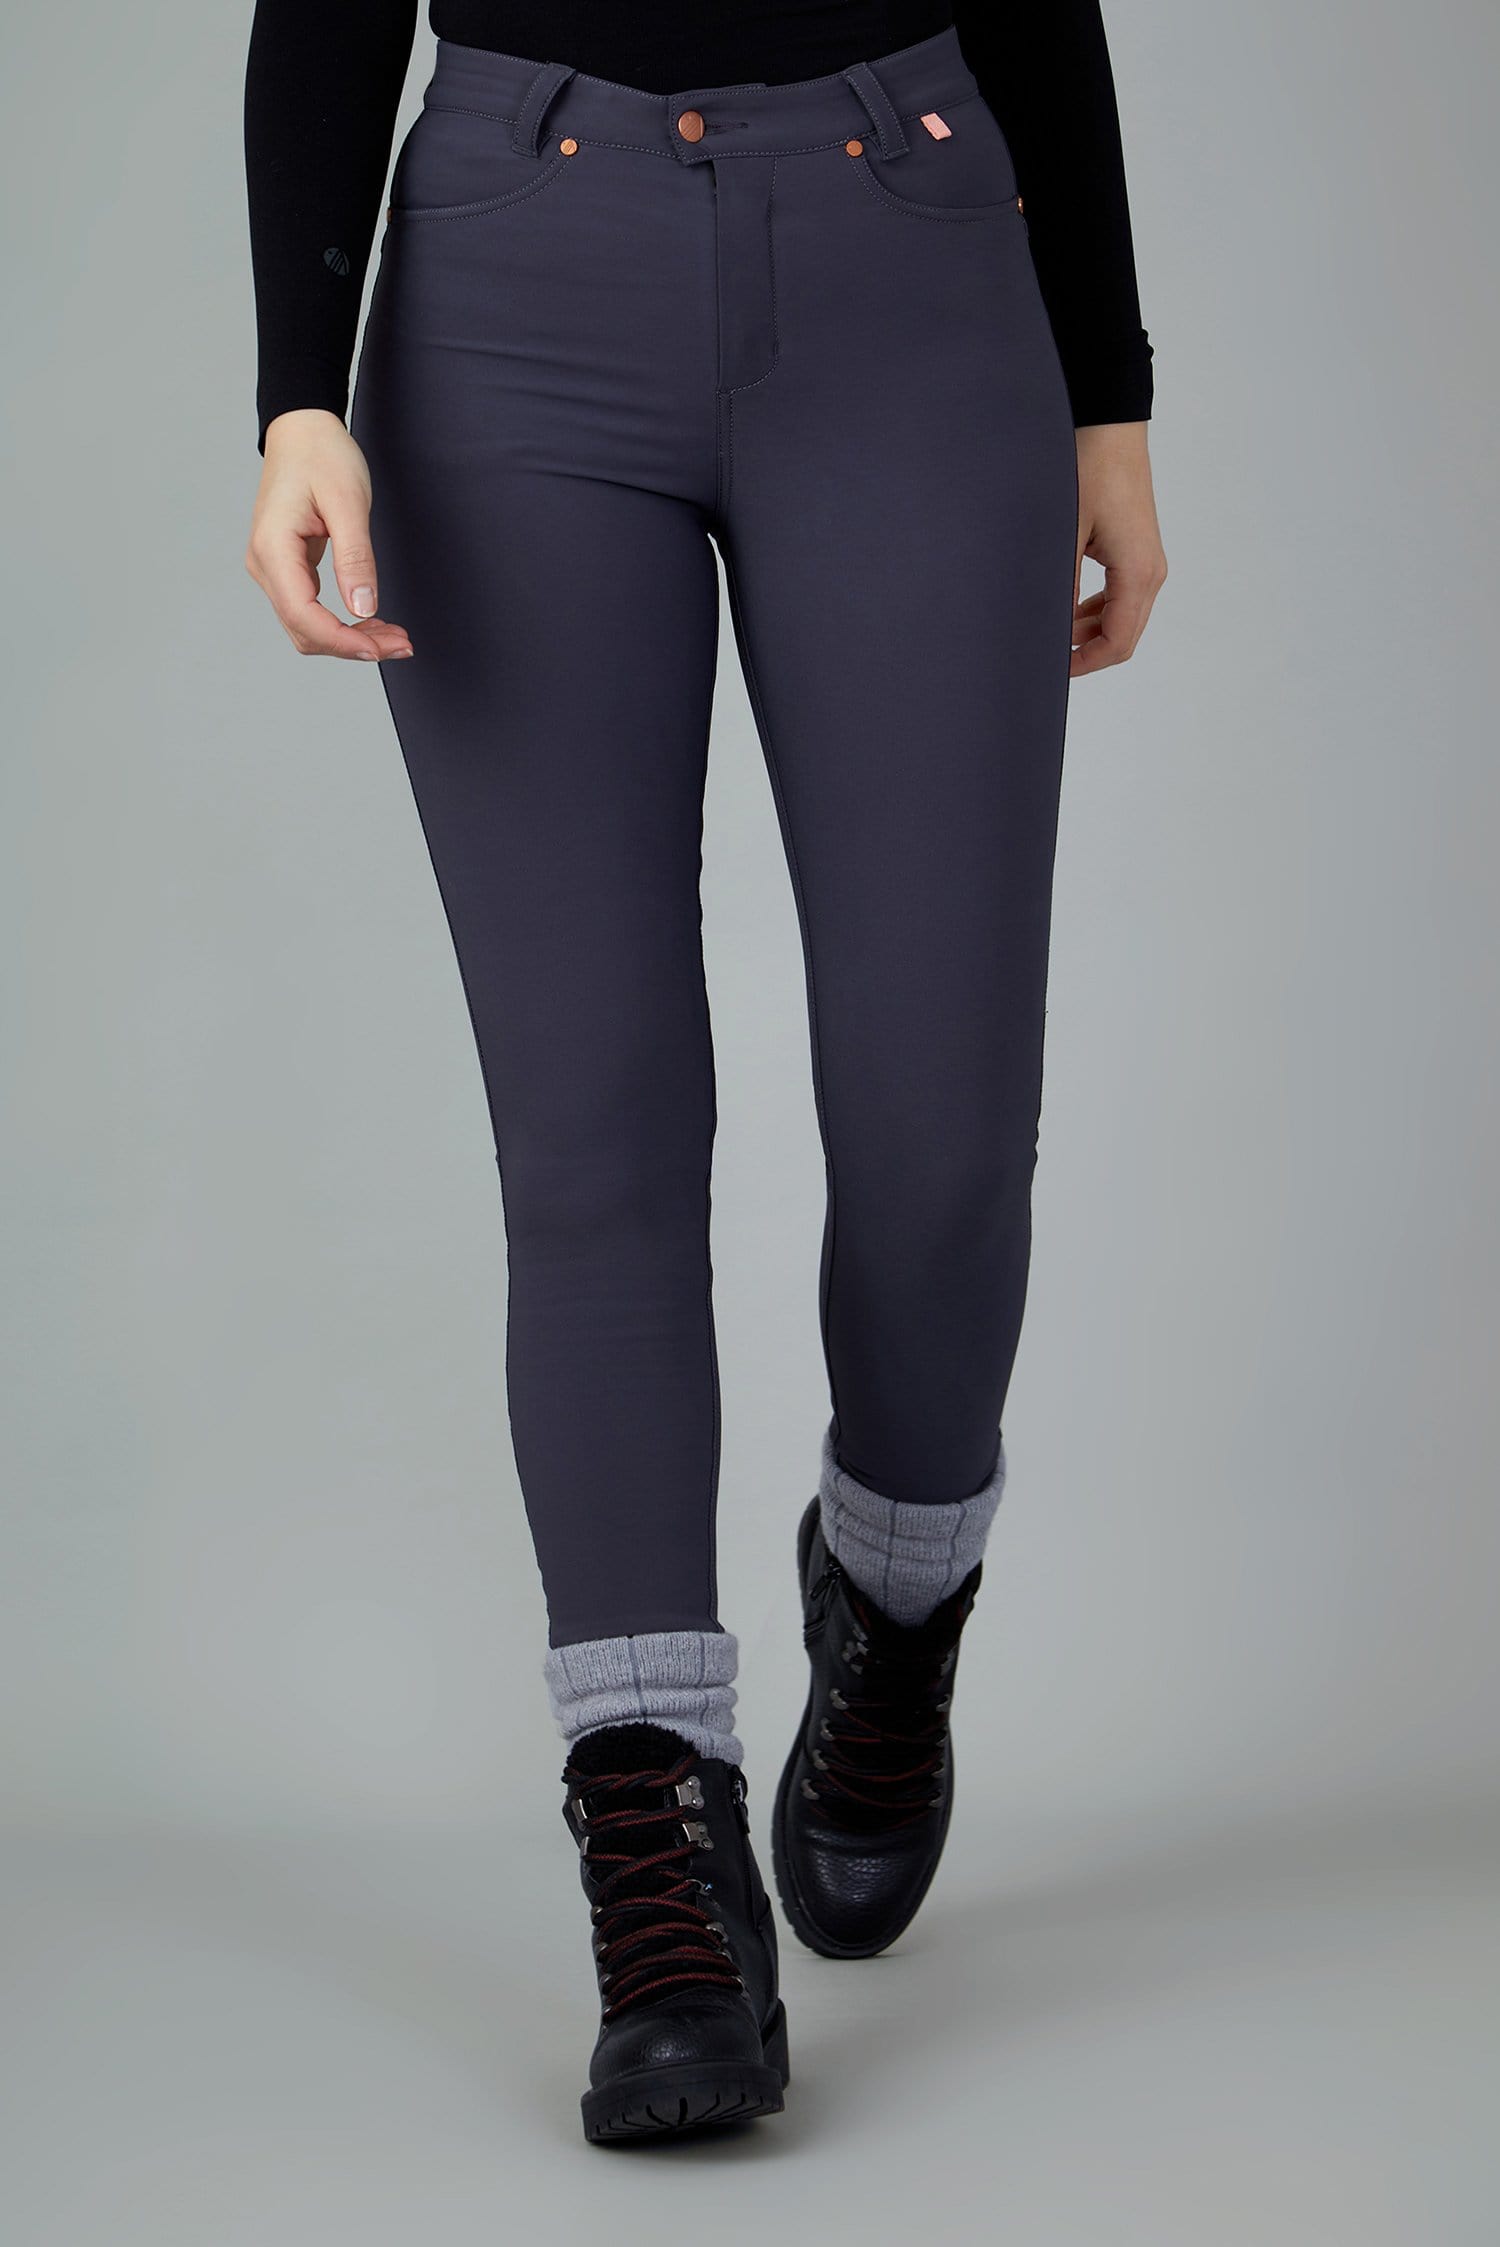 The Aventurite Stretch Skinny Outdoor Trousers - Obsidian - 26p / Uk8 - Womens - Acai Outdoorwear